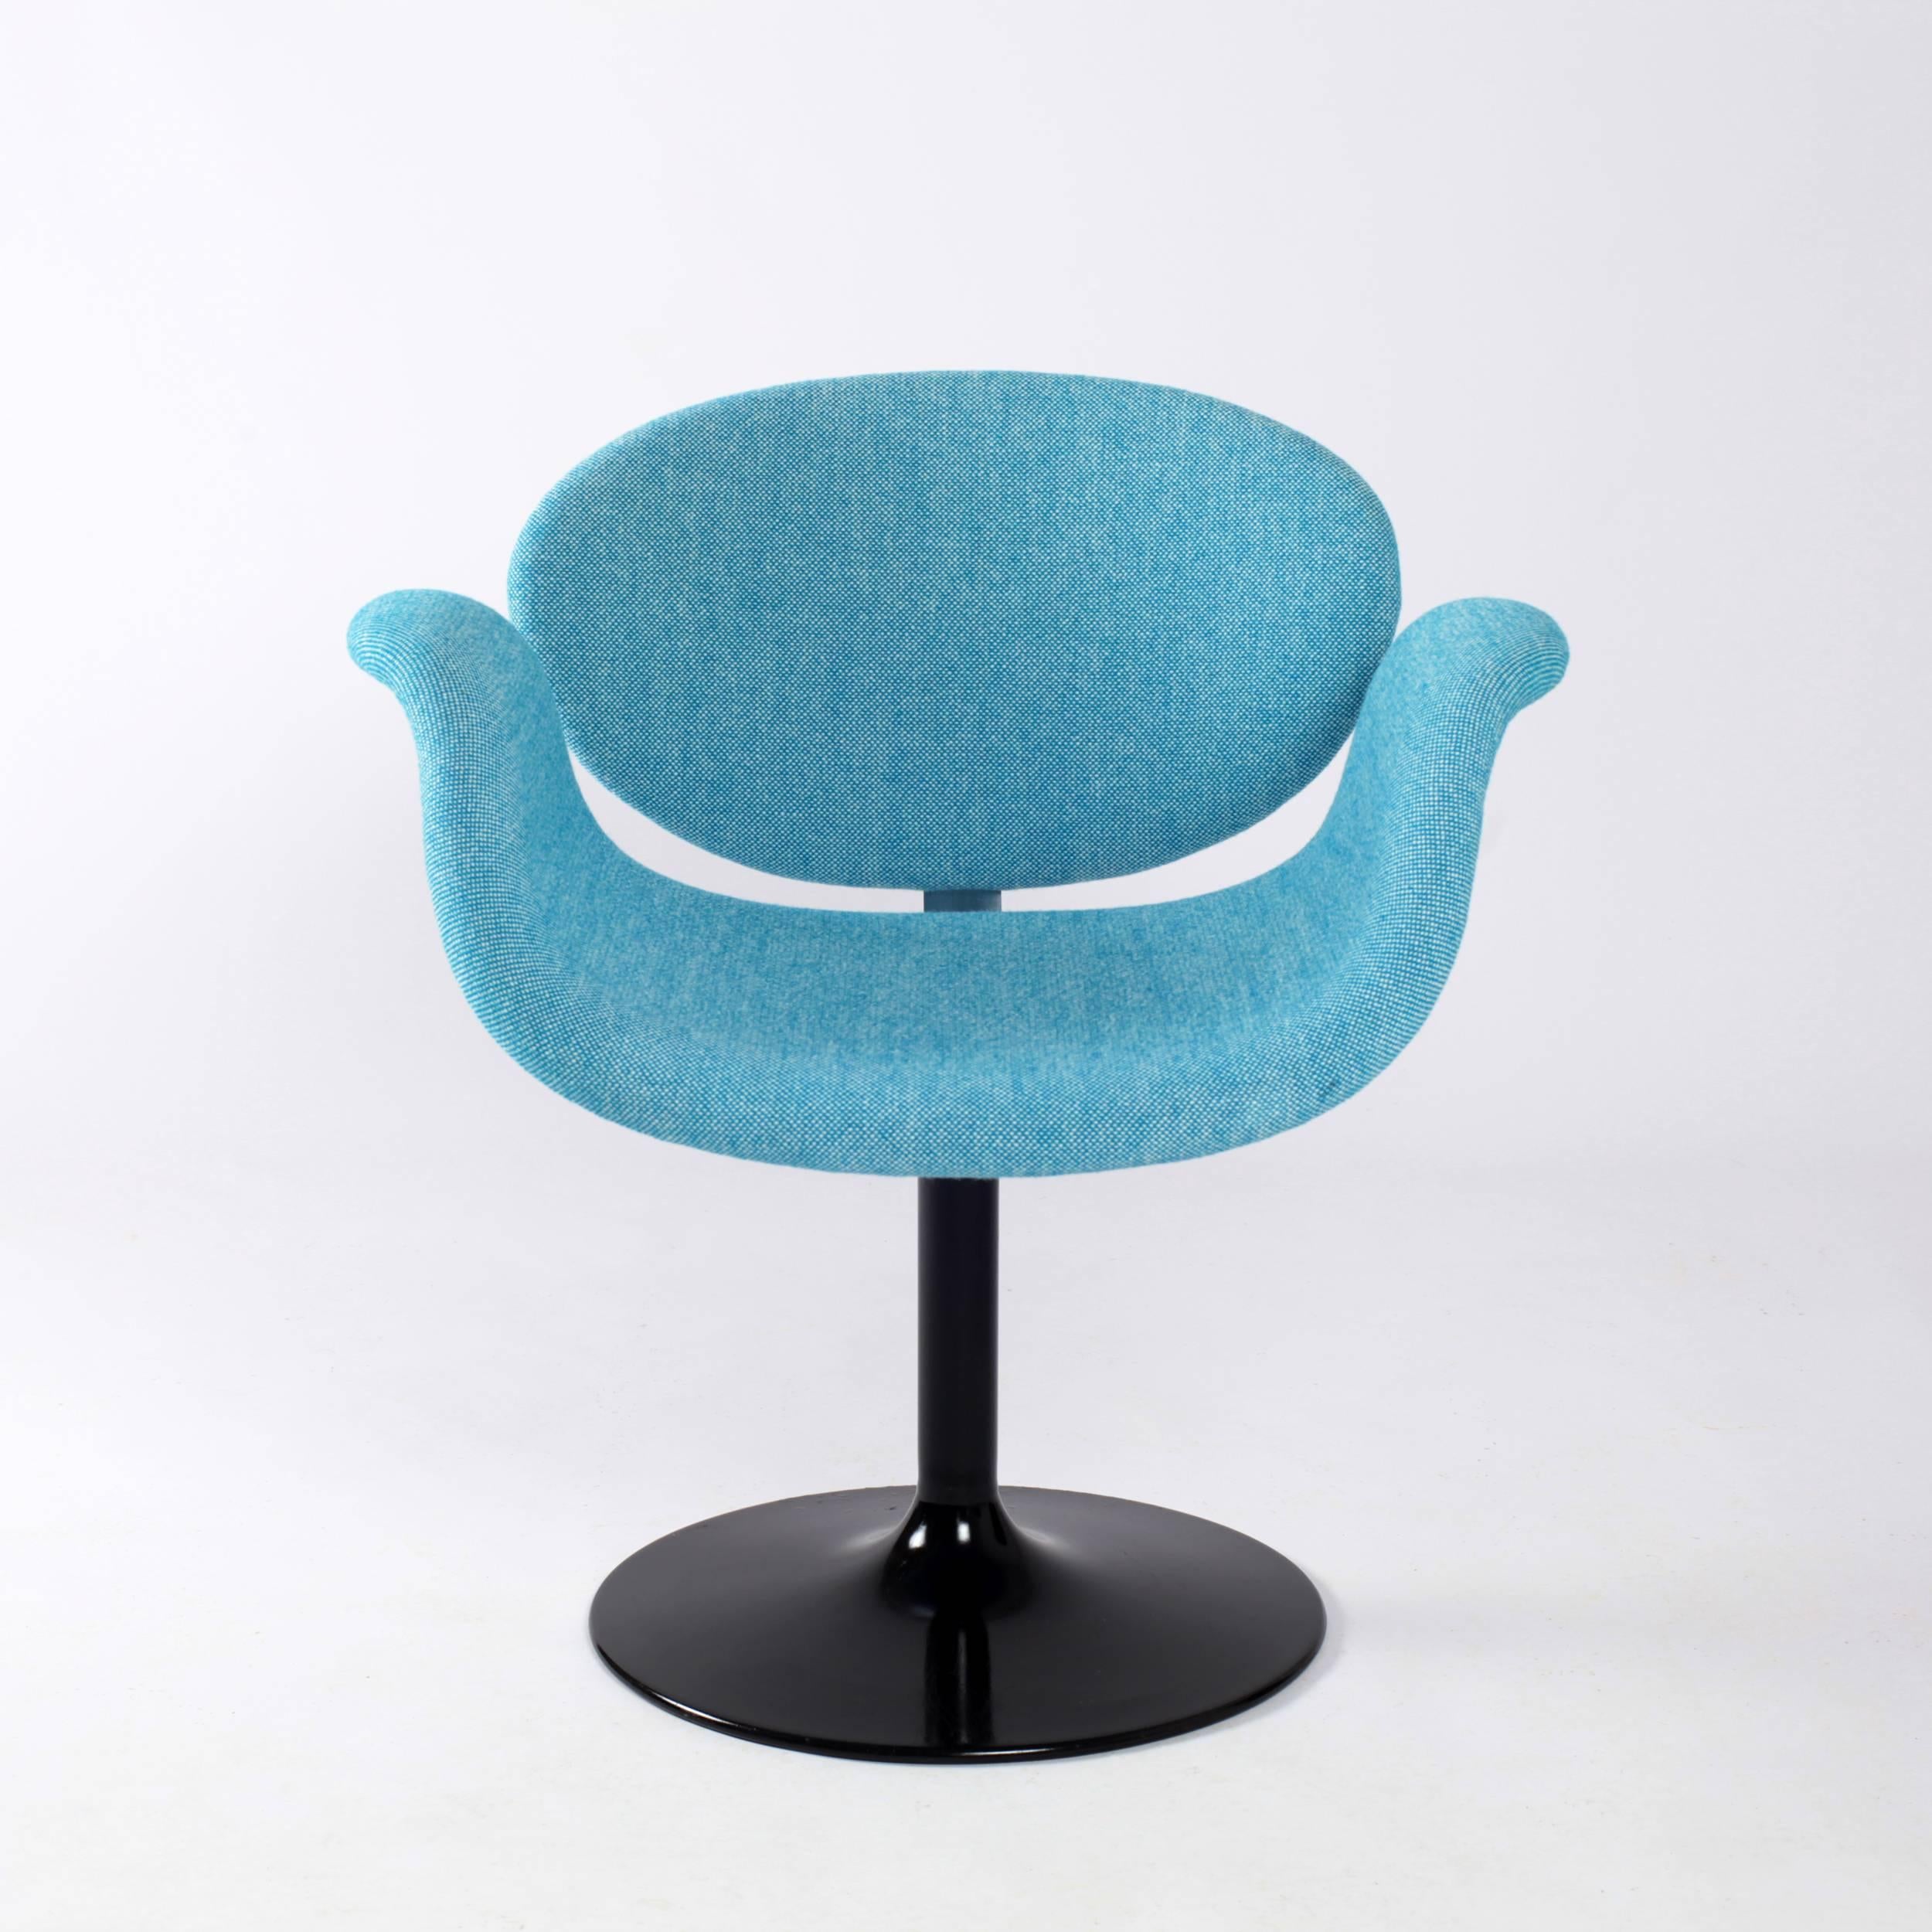 Three little tulip swivel chairs by Pierre Paulin for Artifort, 1963.
Newly upholstered with Kvadrat fabric.
Three different blue - light blue - blue - dark blue
Price per item.